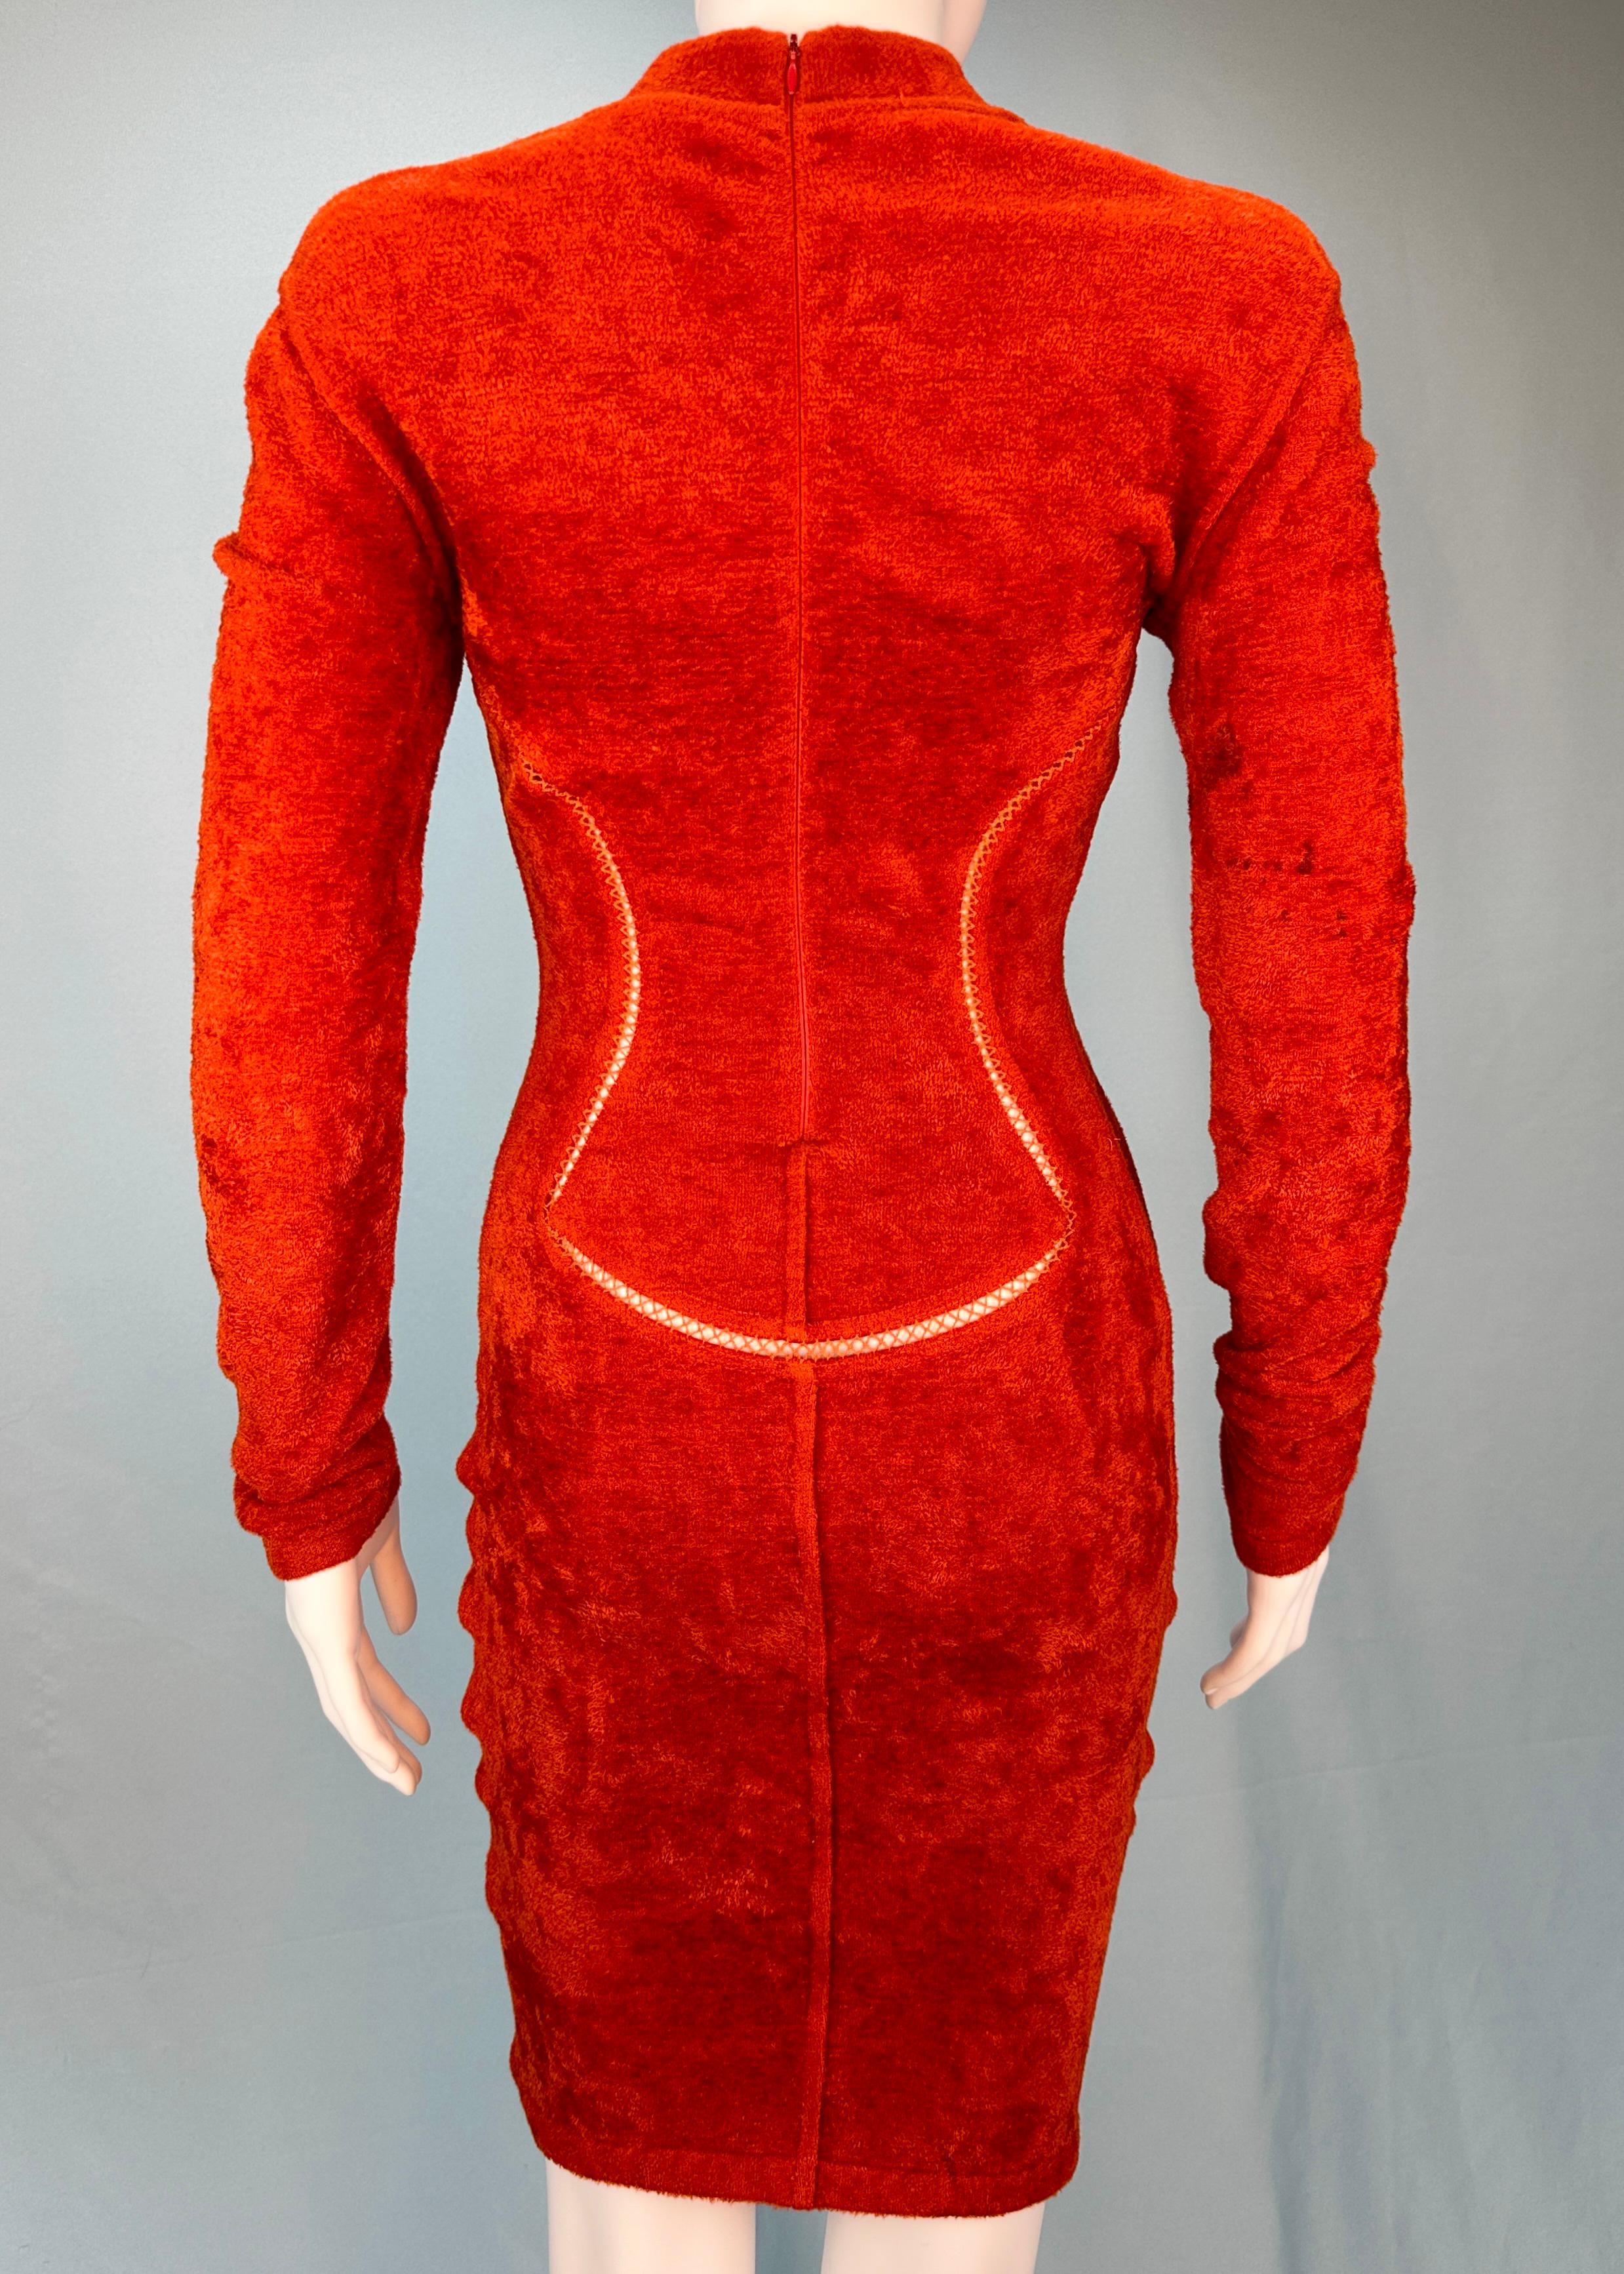 Azzedine Alaia Fall 1991 Runway Orange Chenille Cutout Dress In Good Condition For Sale In Hertfordshire, GB